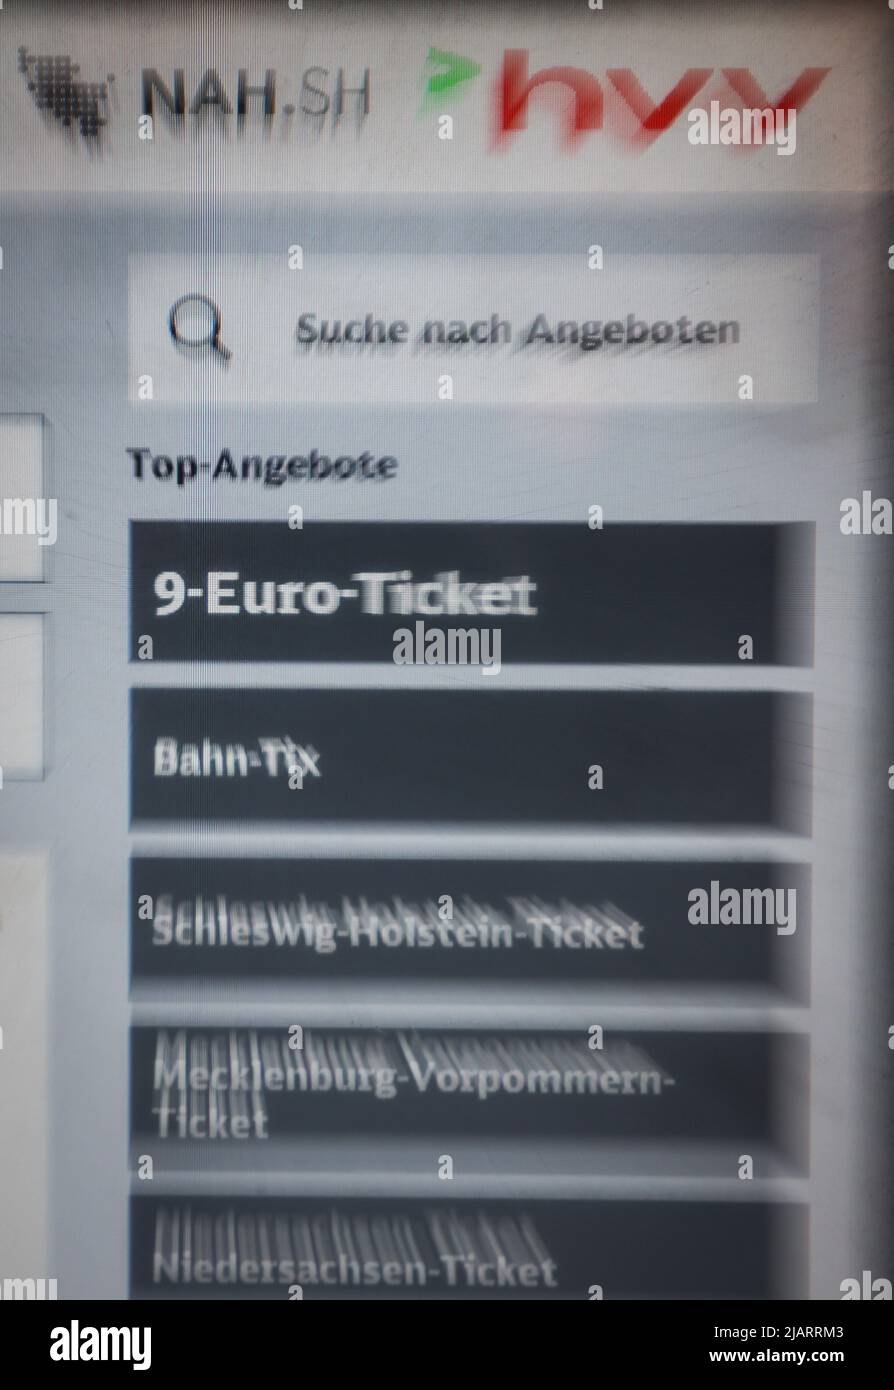 Hamburg, Germany. 01st June, 2022. The display of a ticket vending machine  at the main train station shows the 9-euro ticket for sale. Since June 1,  the 9-Euro-Ticket has been valid for